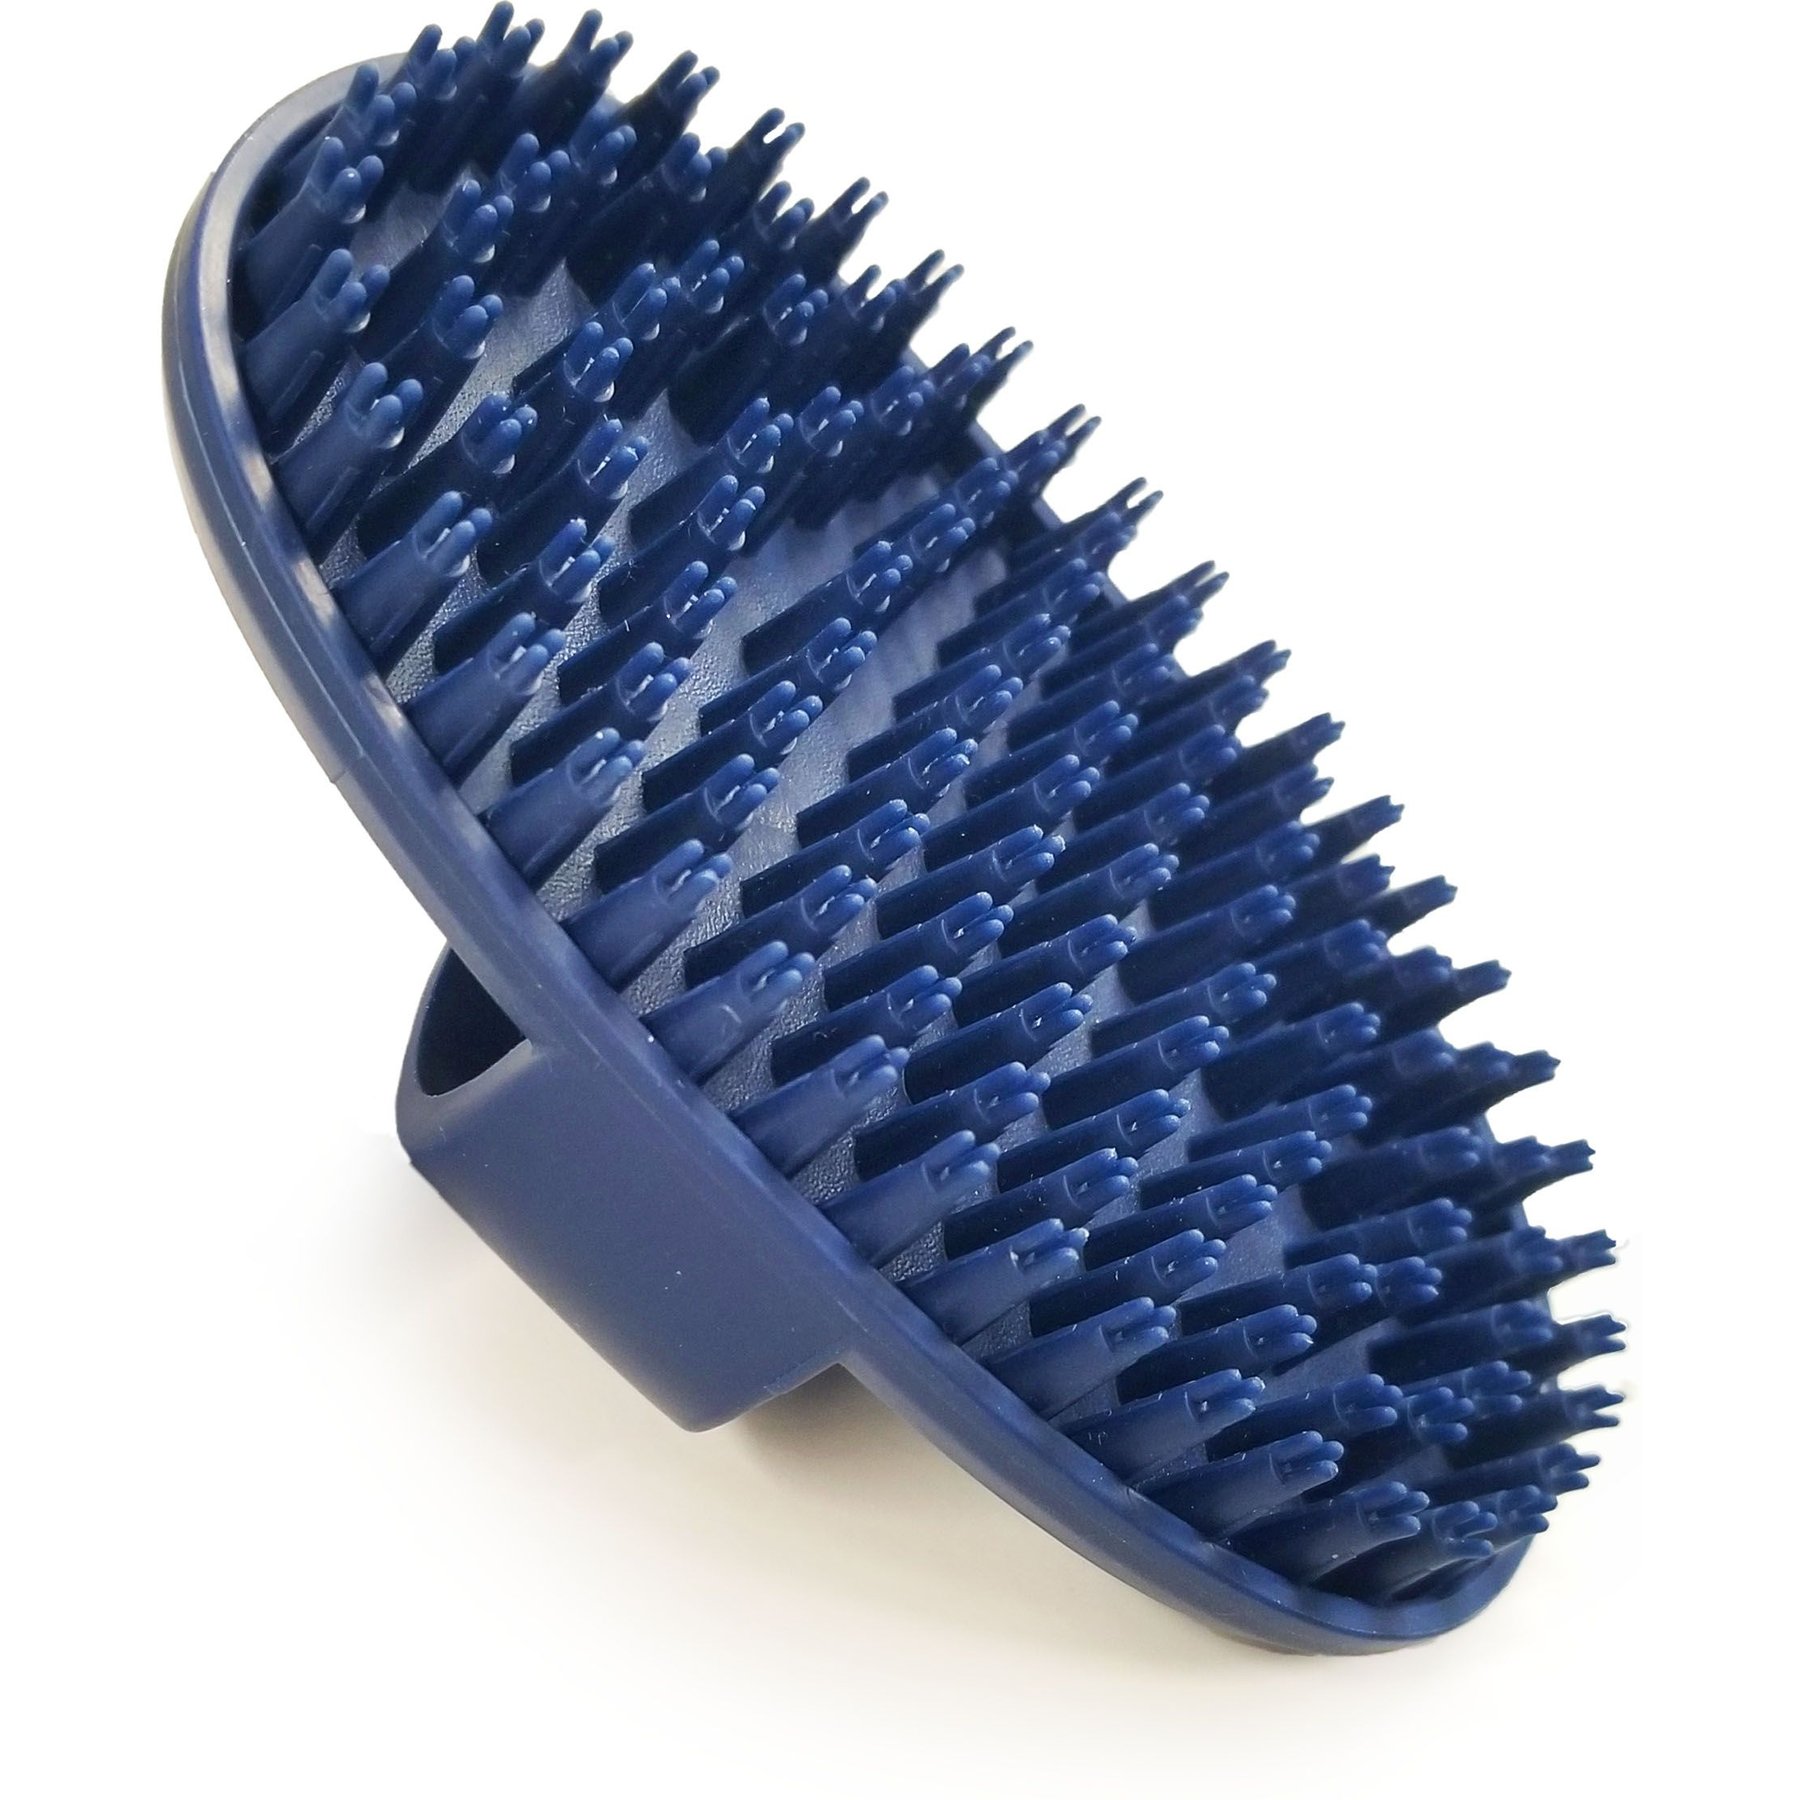 Cleaning Comb Brush Hair Cleaner Tool Hairbrush 2 In 1 Embedded Remover  Rake Removing Dust Supplies Cleaners 